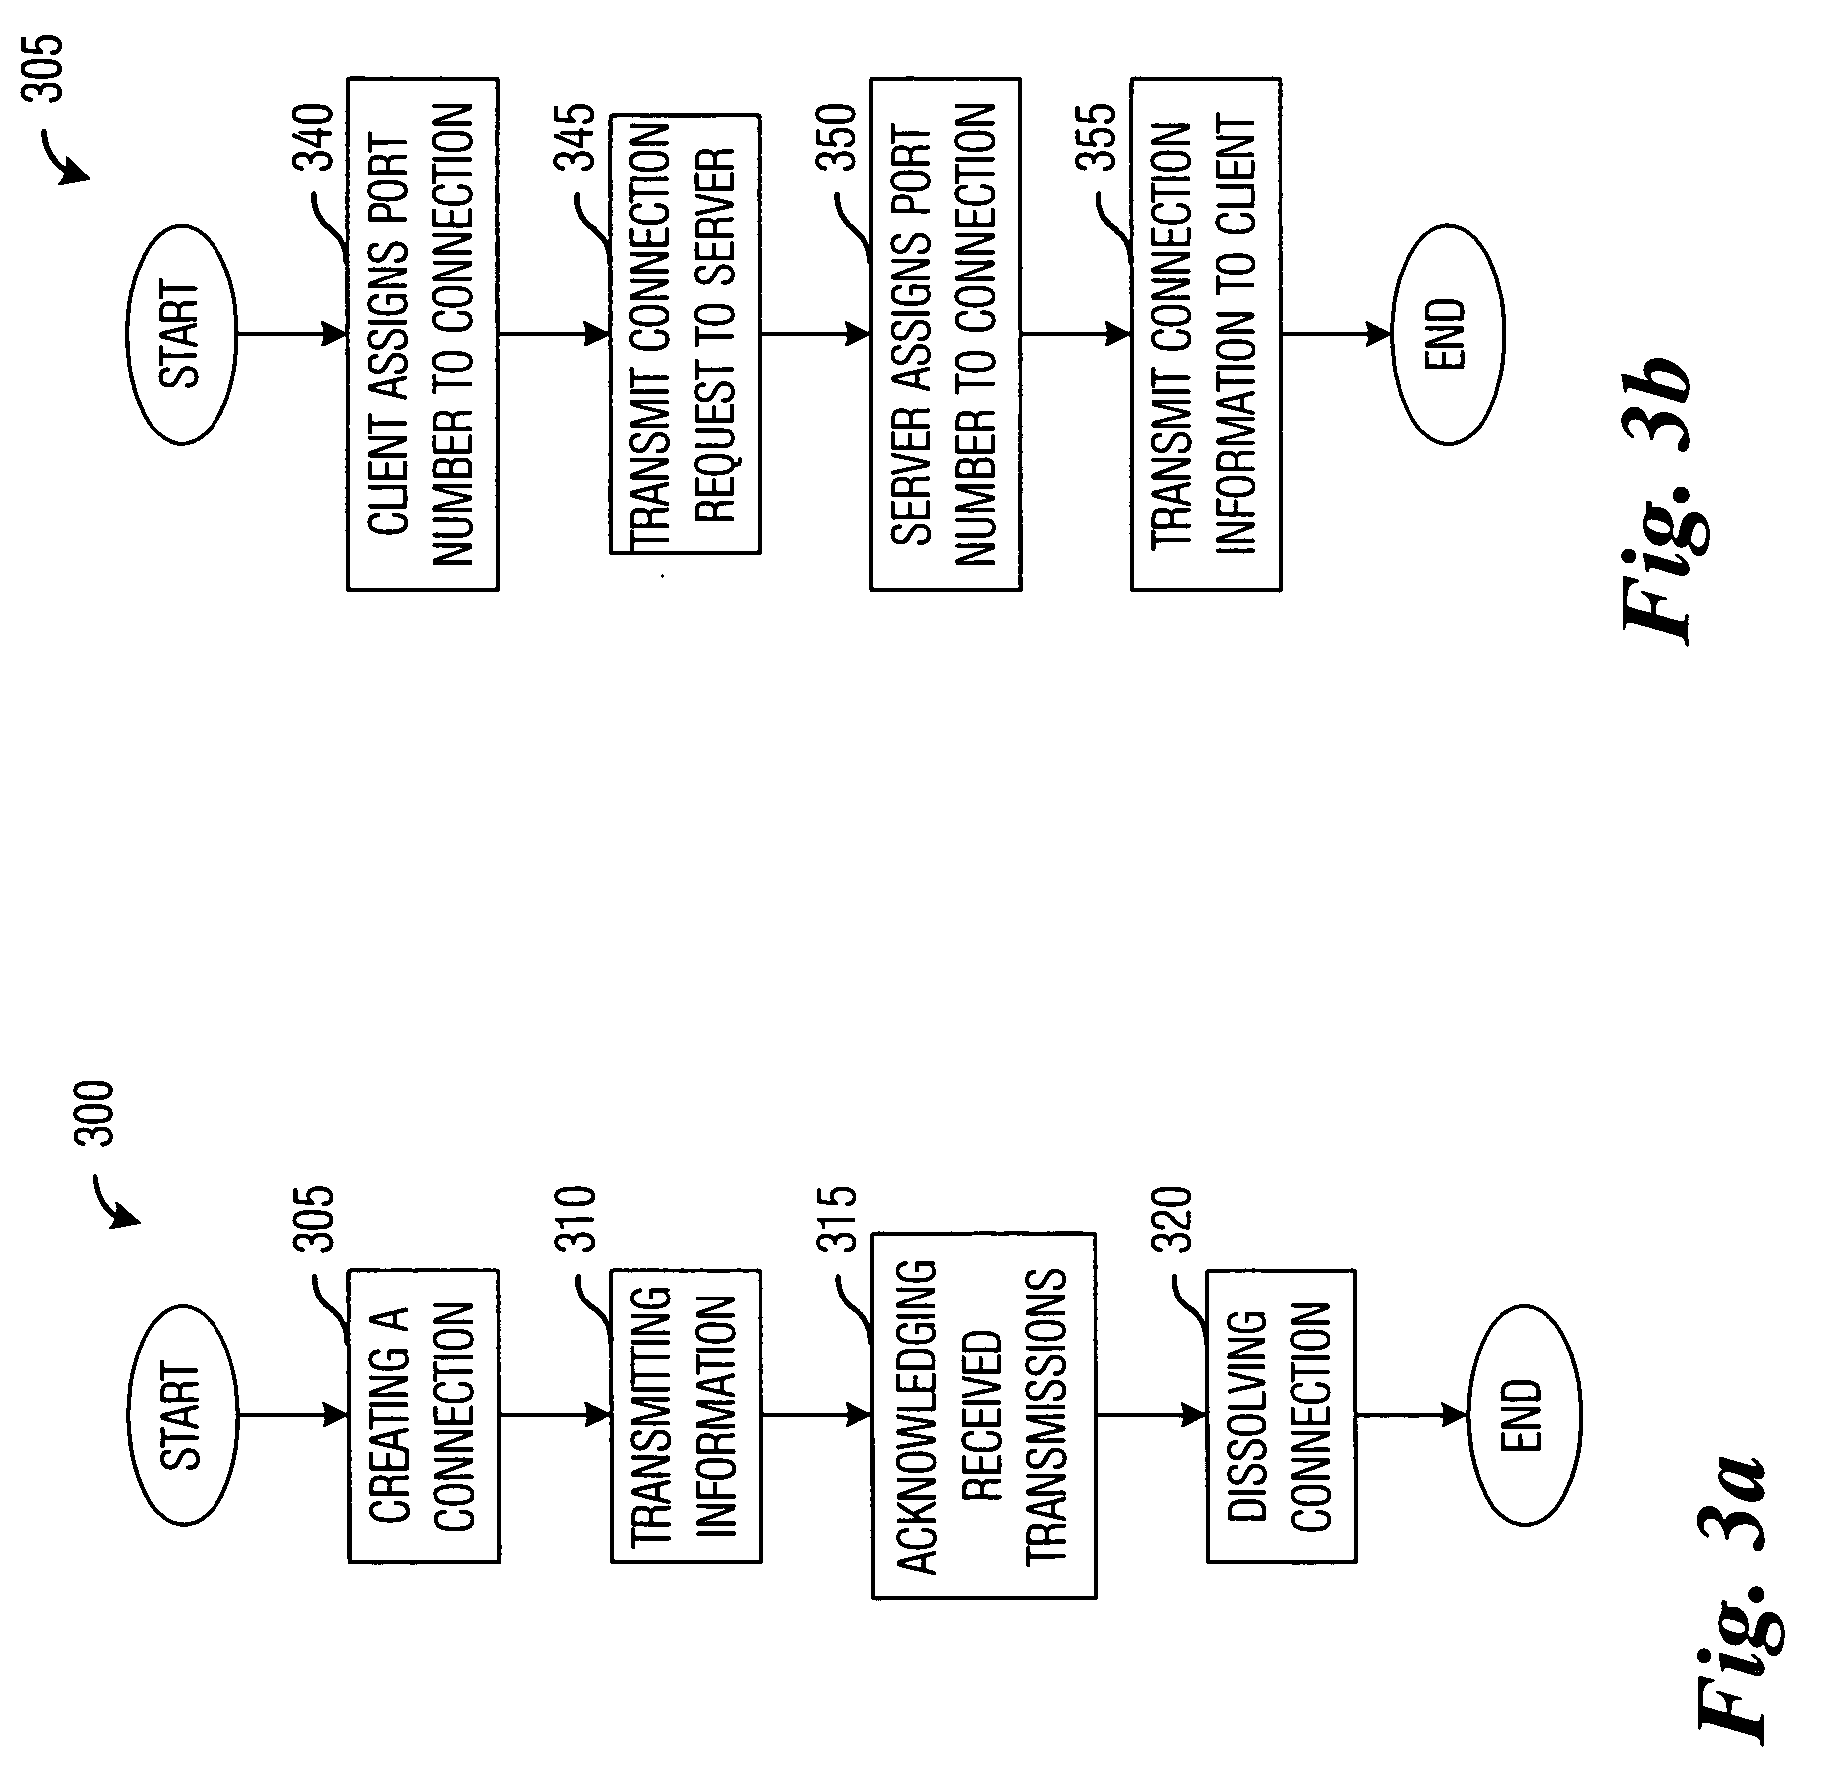 Memory and processor efficient network communications protocol